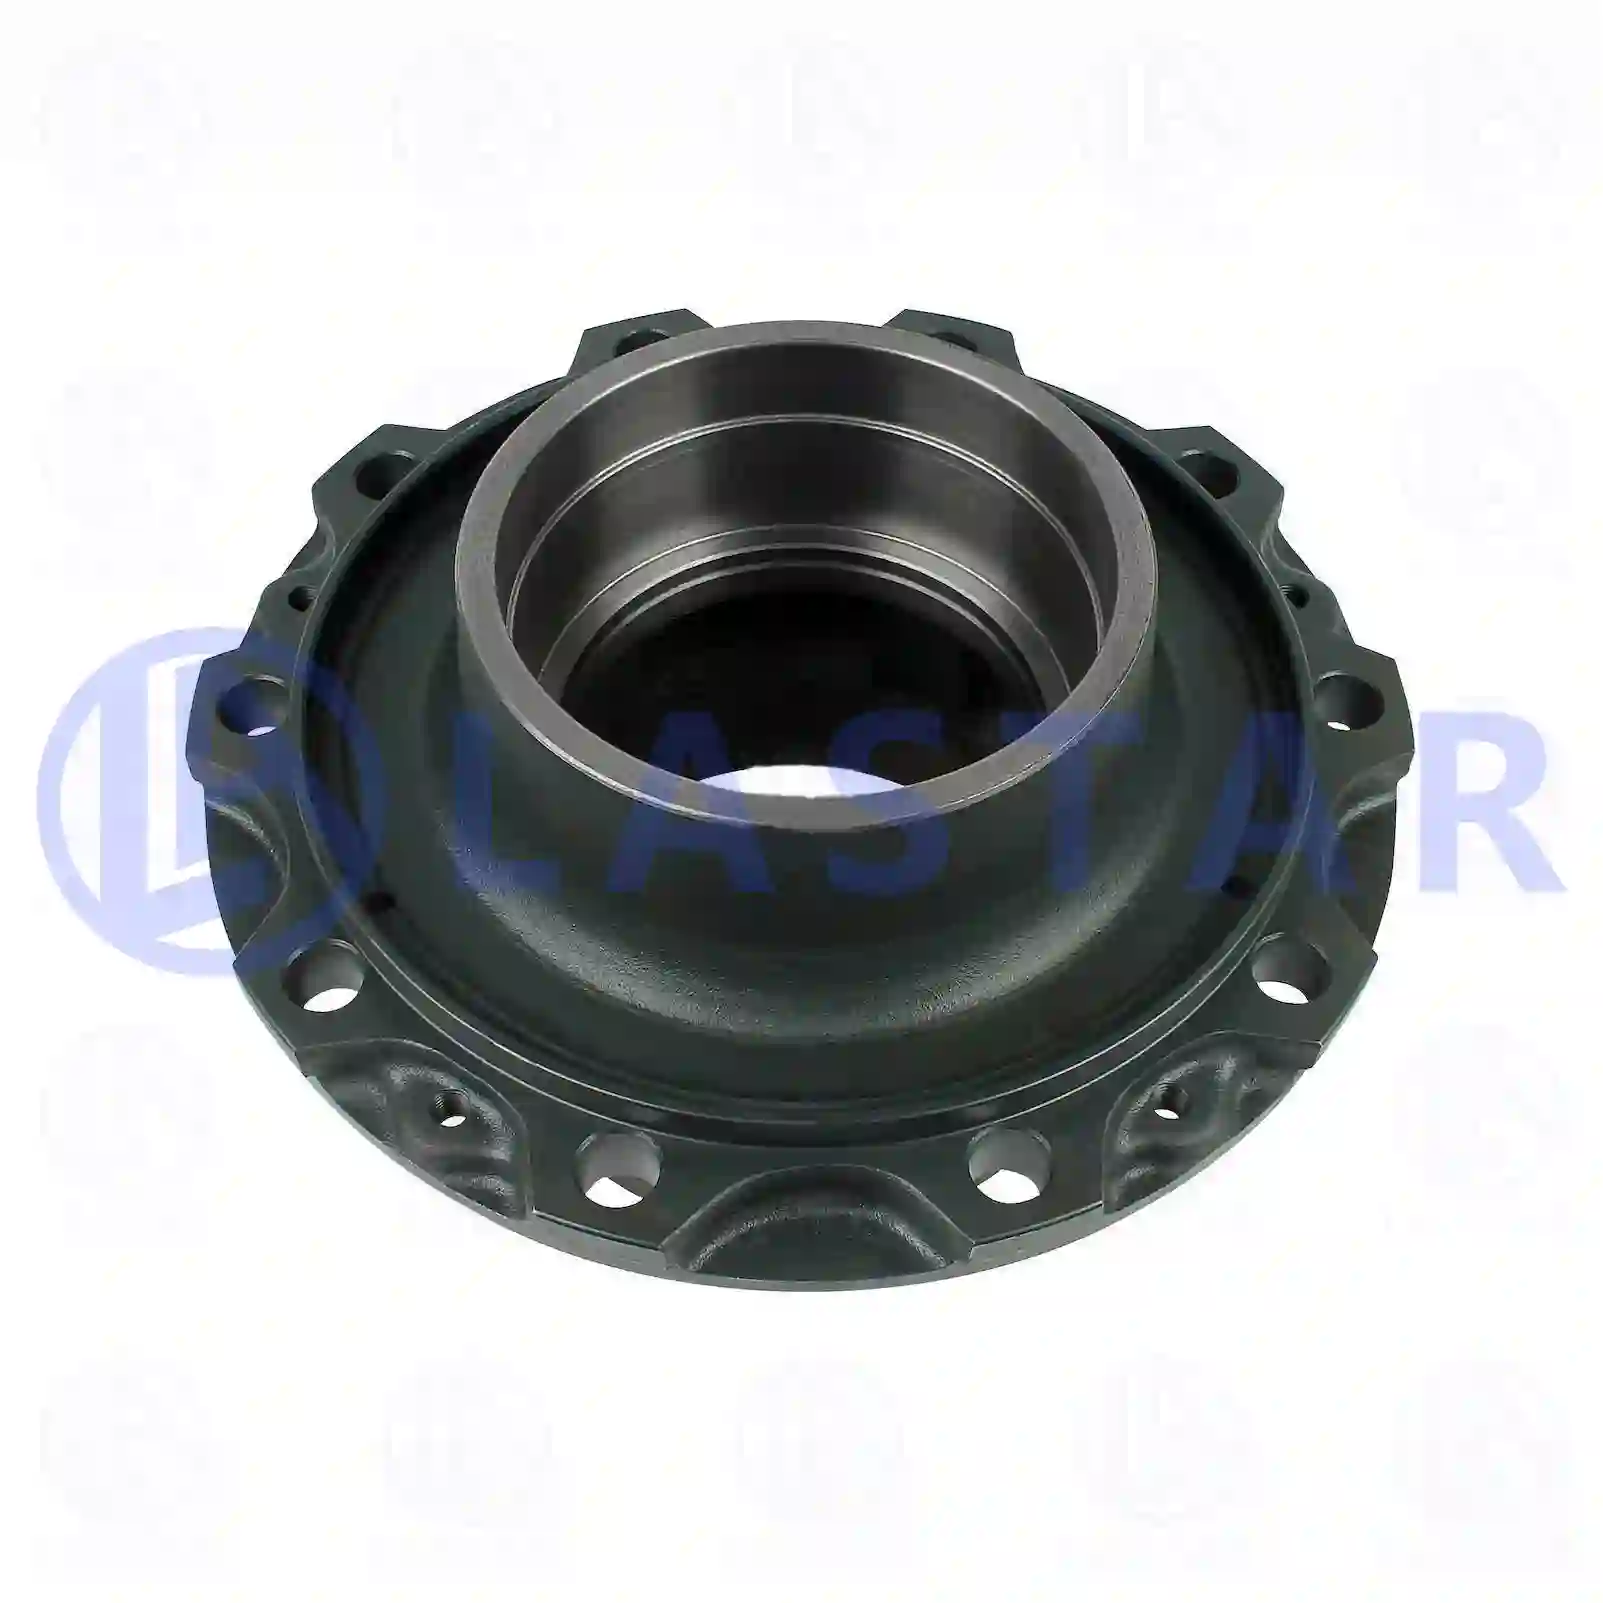 Wheel hub, without bearings, 77726351, 3463563101, , , , , ||  77726351 Lastar Spare Part | Truck Spare Parts, Auotomotive Spare Parts Wheel hub, without bearings, 77726351, 3463563101, , , , , ||  77726351 Lastar Spare Part | Truck Spare Parts, Auotomotive Spare Parts